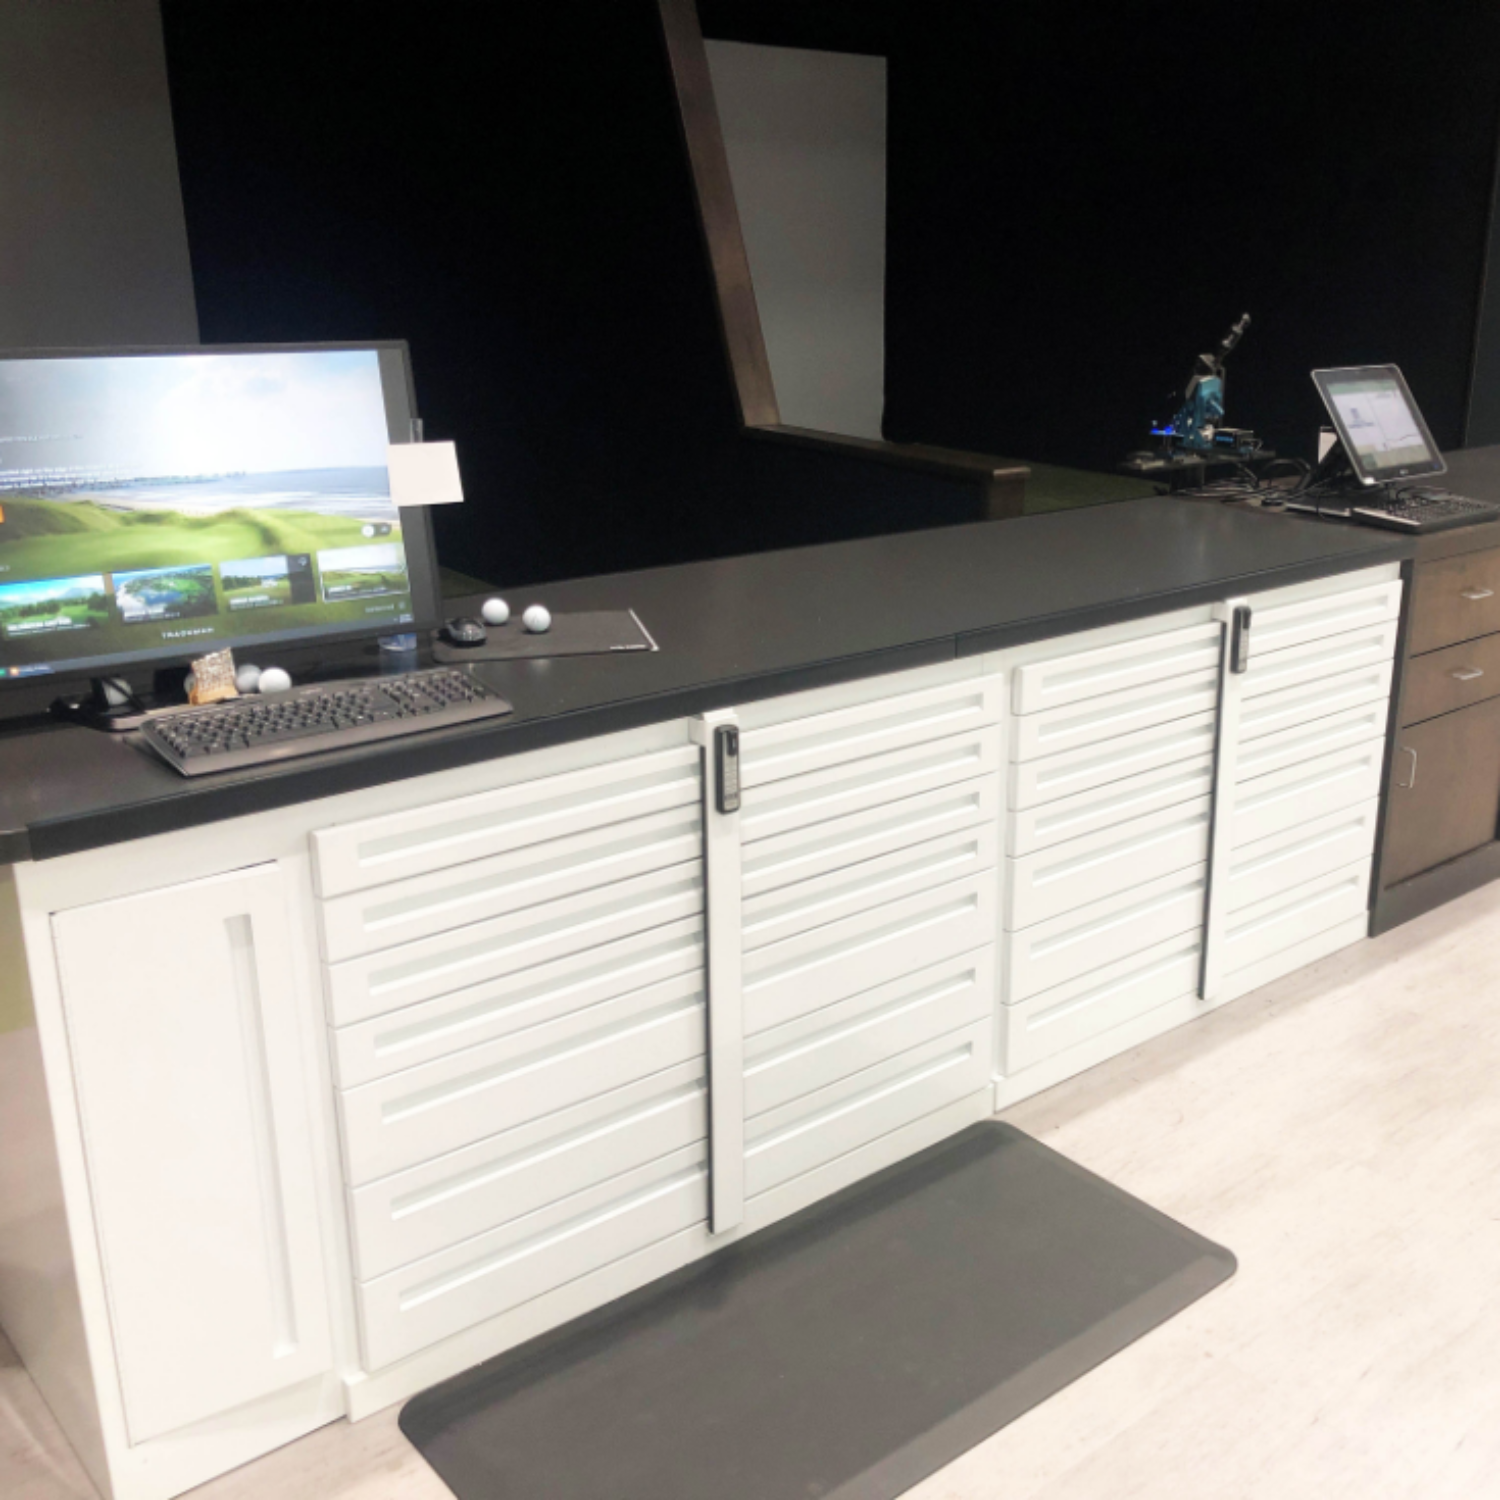 The counter in the PGA store